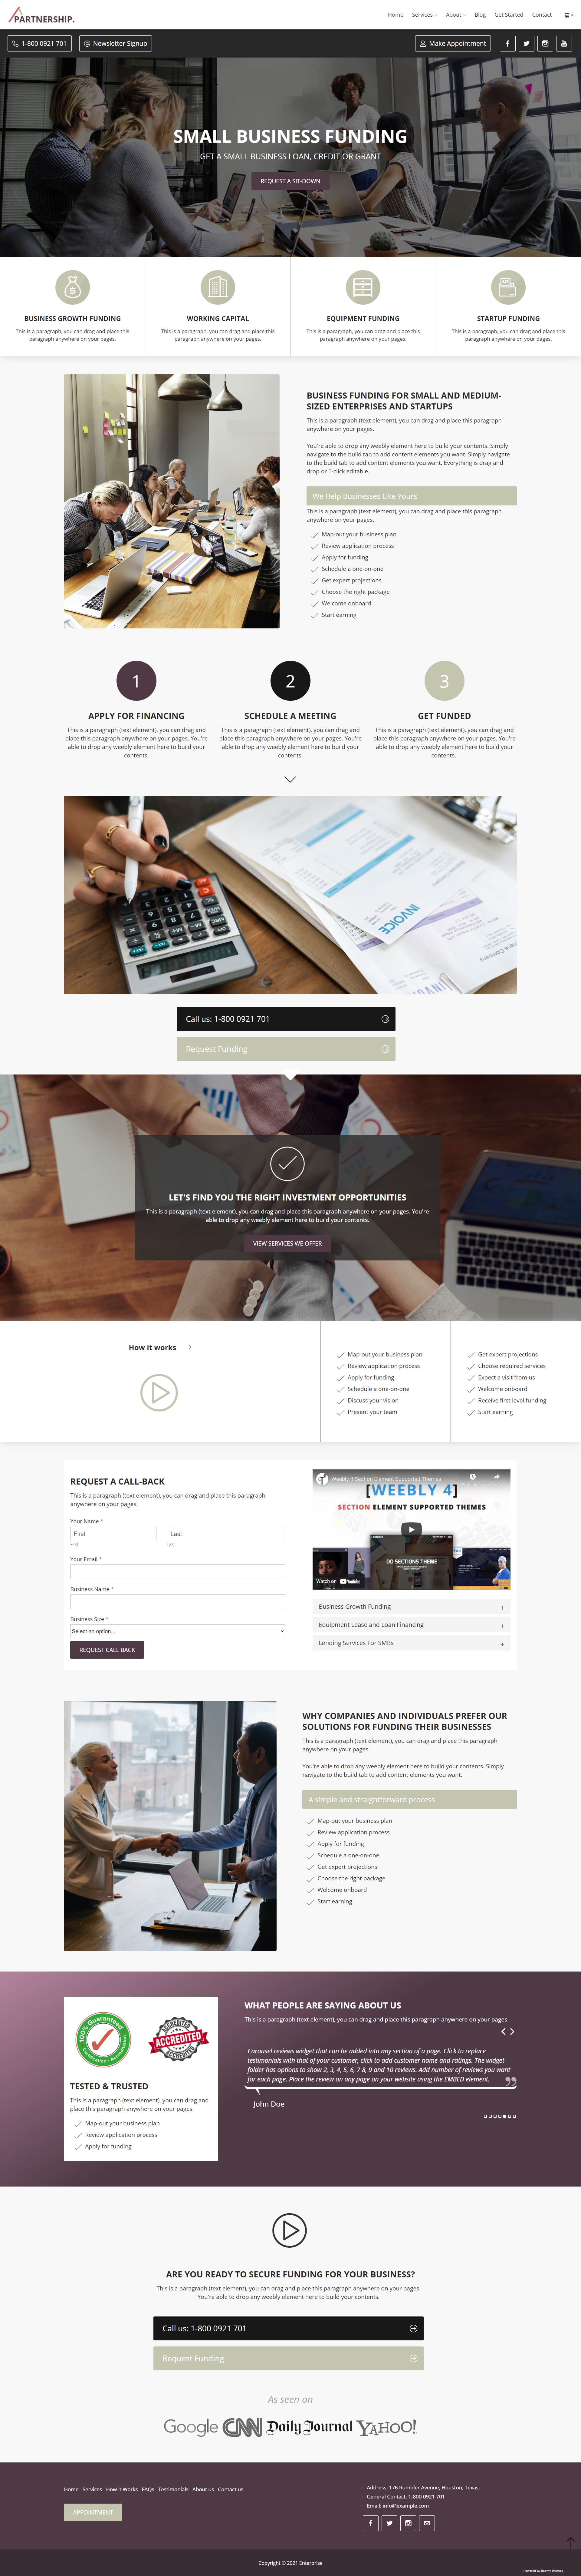 Partnership theme, premier website template for Weebly drag and drop builder